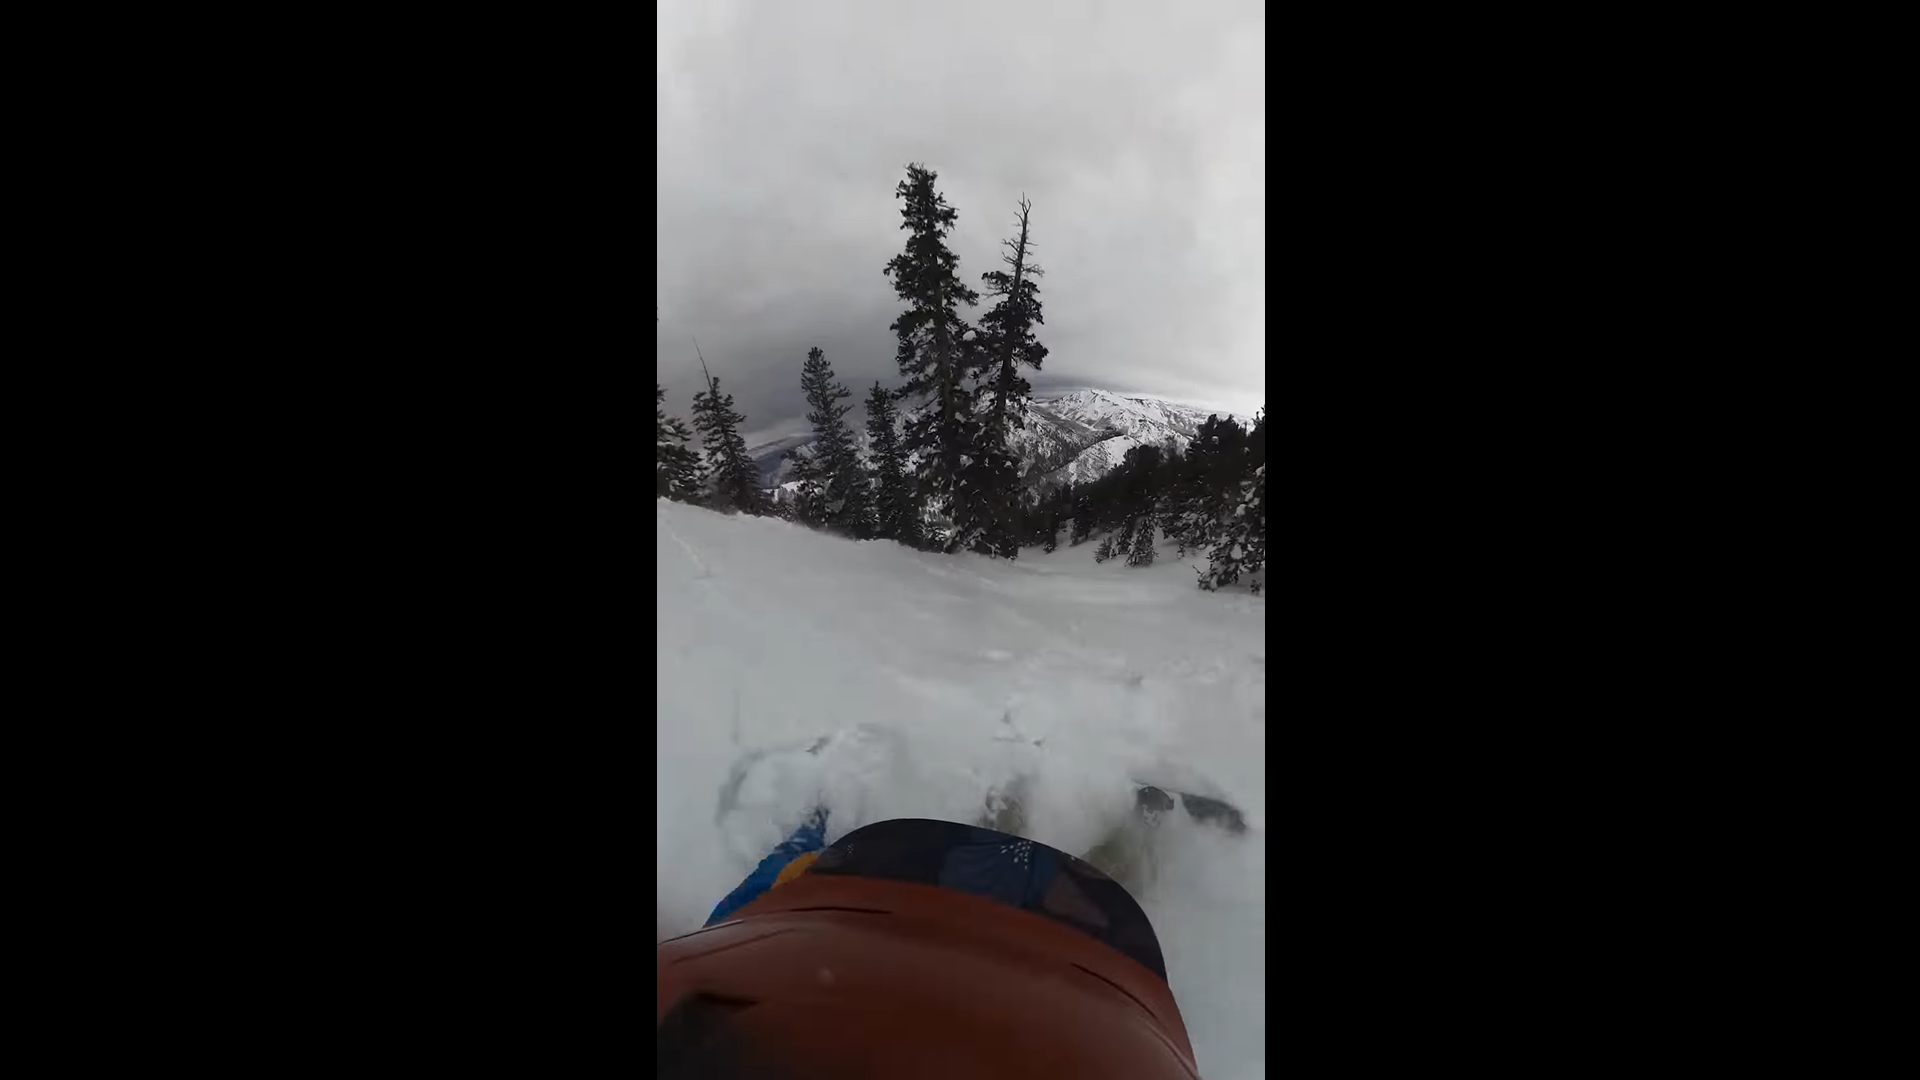 Blake Nielson, an Utah snowboarder captures moment he rode down with an avalanche